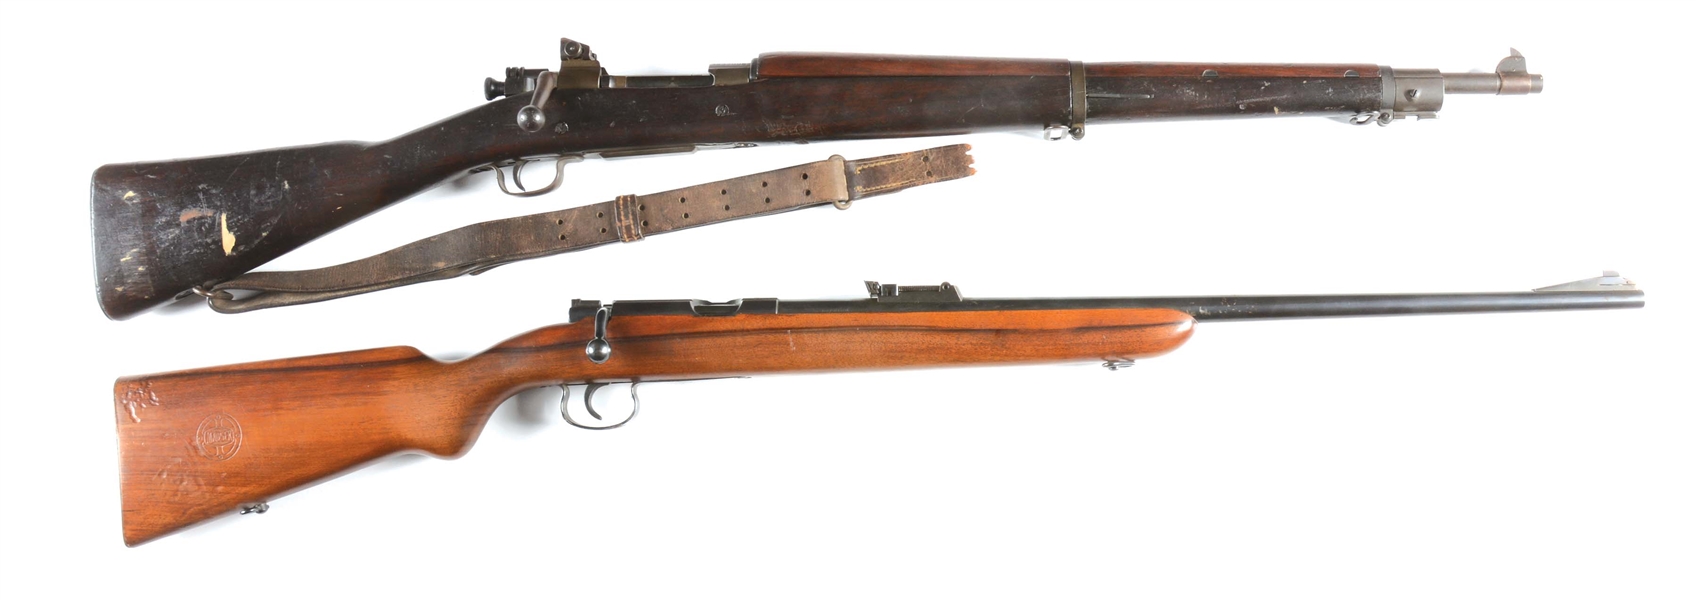 (C) LOT OF TWO: REMINGTON 03-A3 AND MAUSER BANNER .22 BOLT ACTION RIFLES.